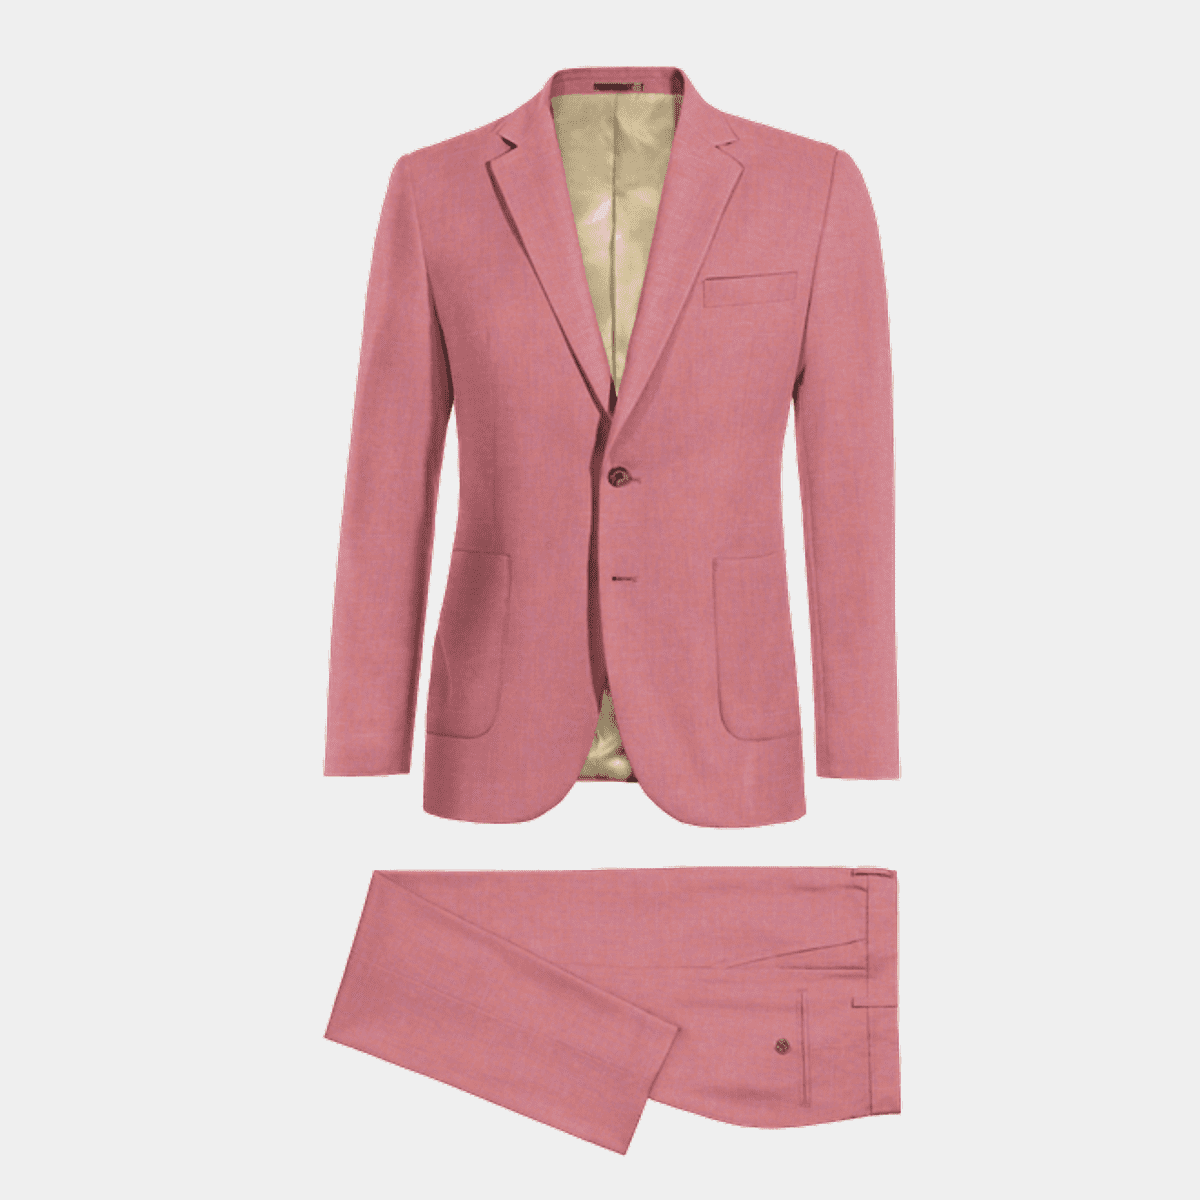 Blush pink lightweight linen slim fit Suit with patched pockets